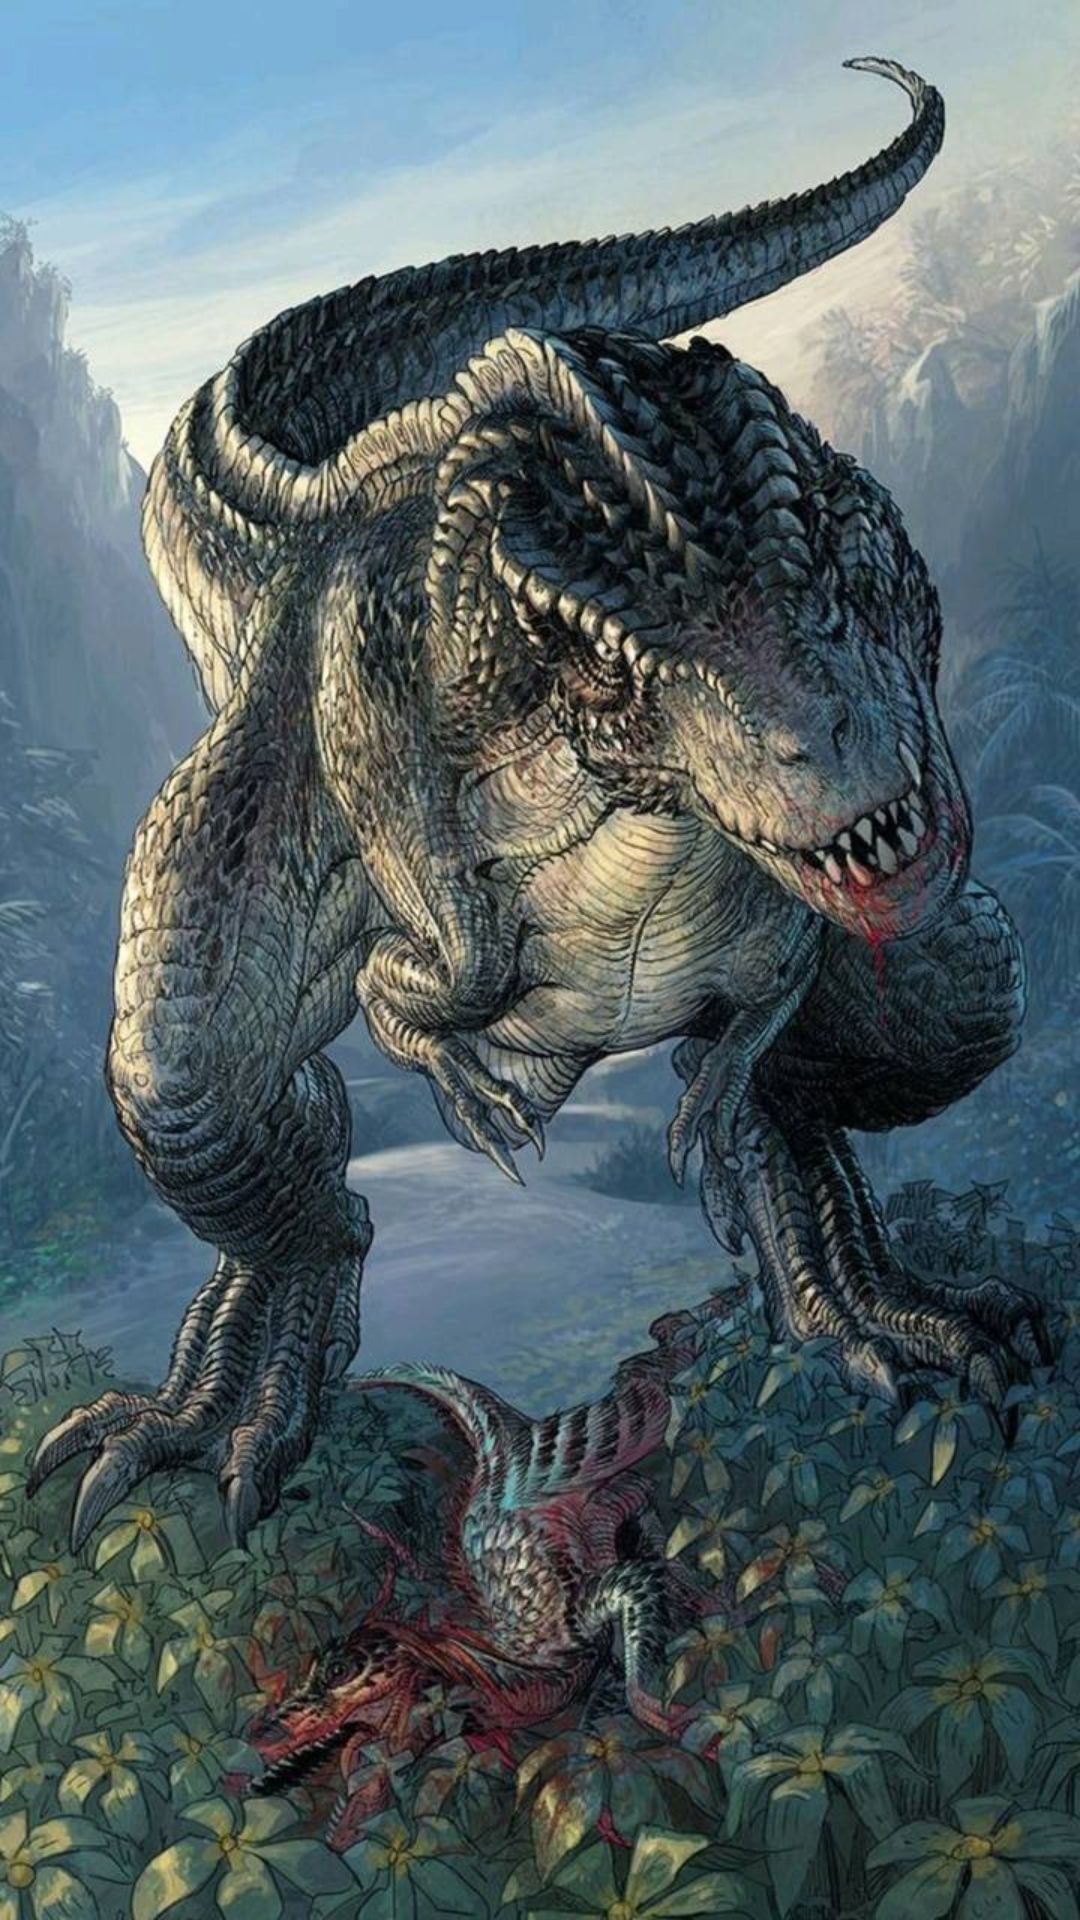 Best dinosaur wallpapers, High-definition images, Stunning backgrounds, Dinosaur enthusiasts, 1080x1920 Full HD Phone